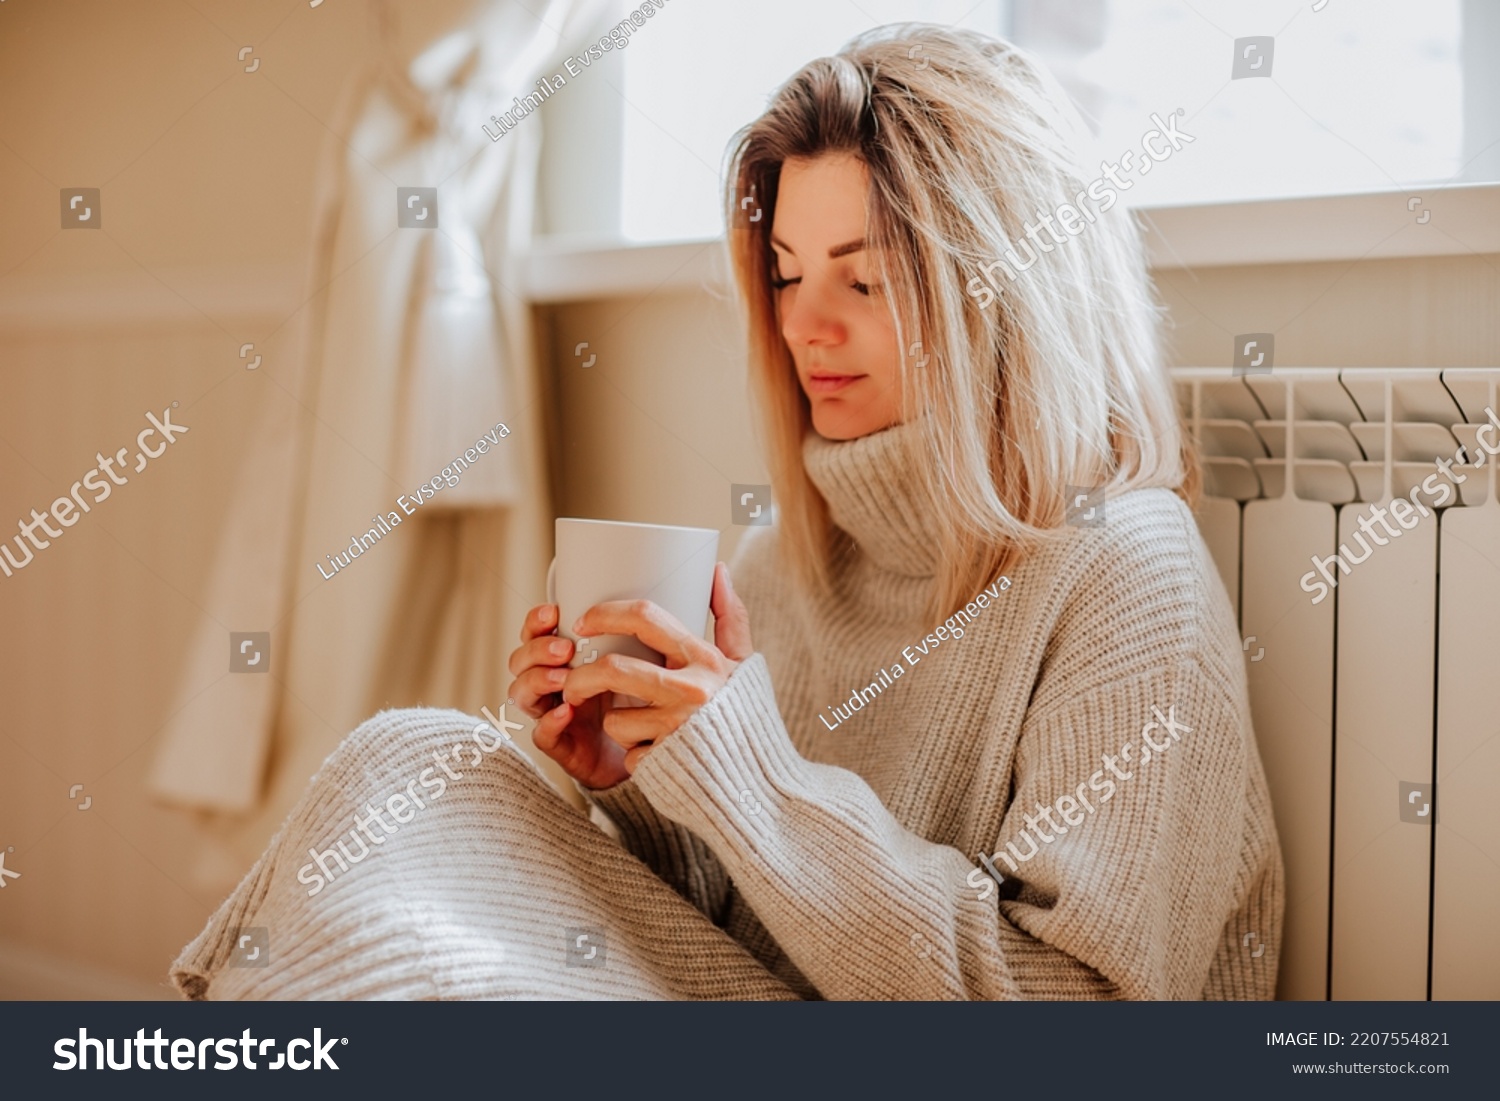 Young blond woman in long winter beige sweater is holding a cup of coffee and posing at home near the radiator. Winter season concept. Focus is at hands. Economy program #2207554821